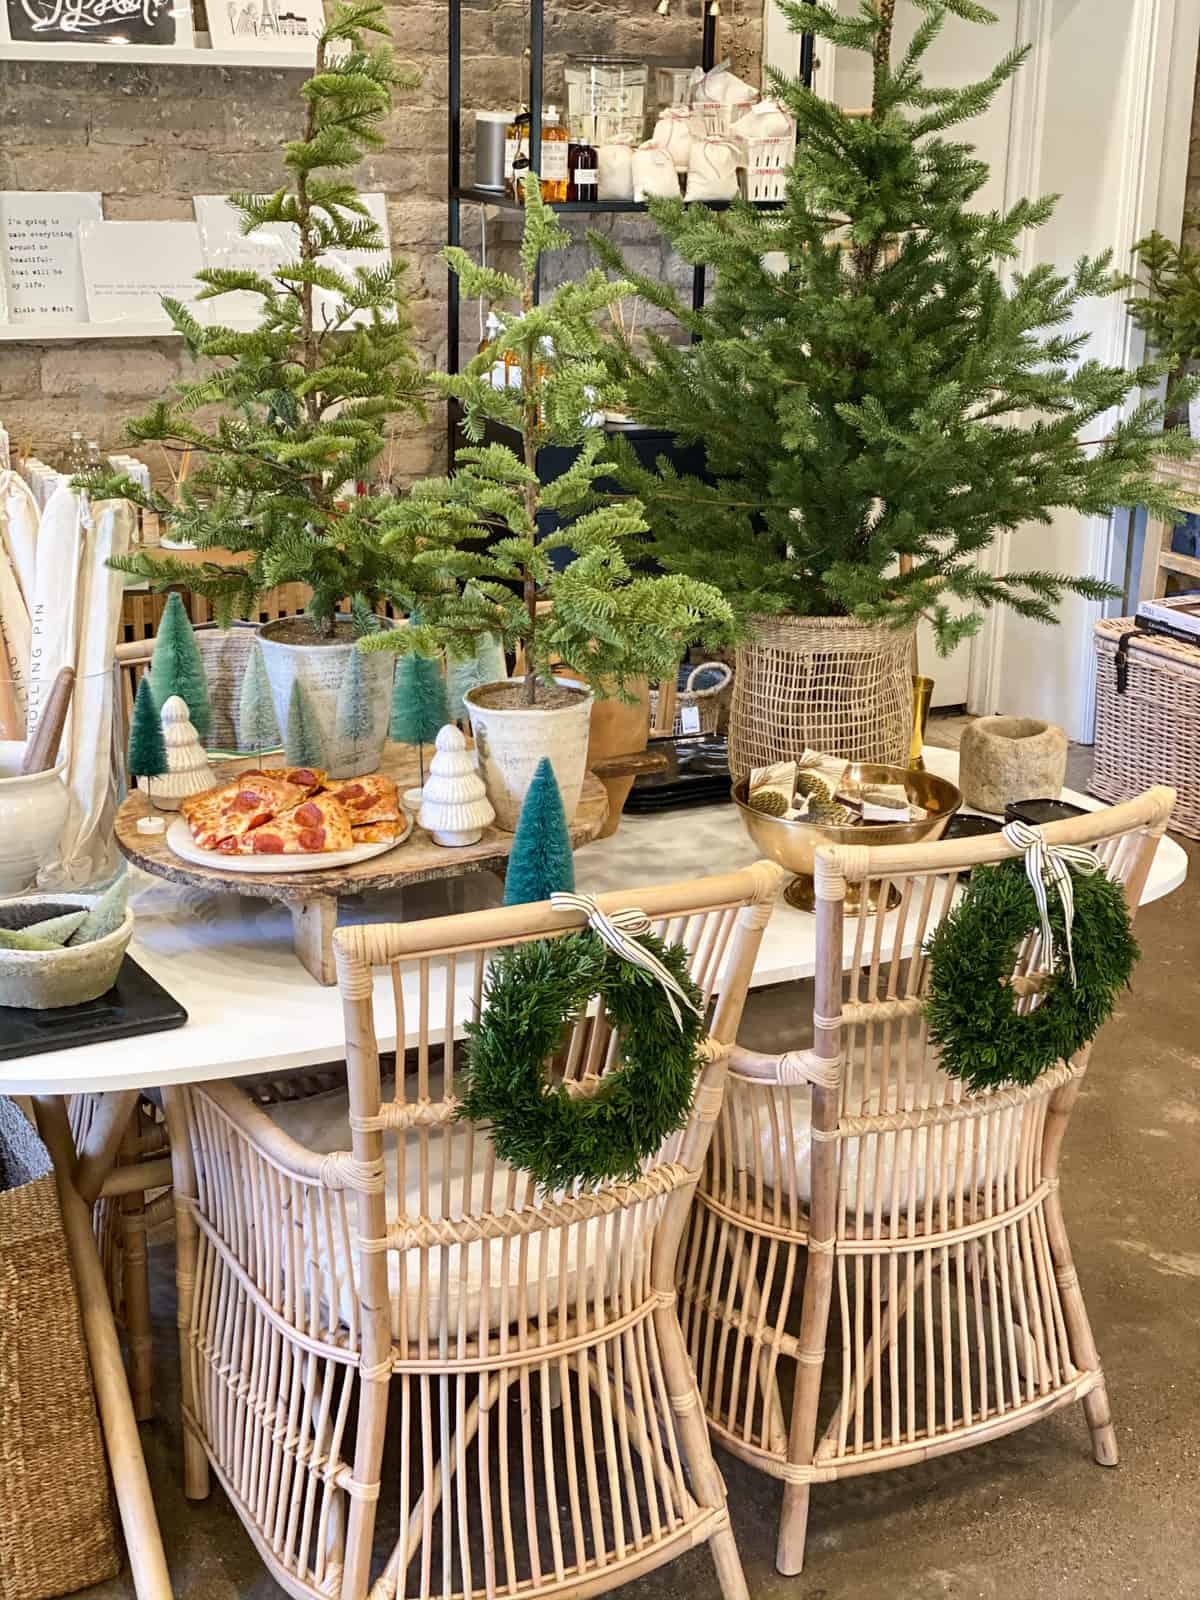 Modern table with green wreaths on chairs